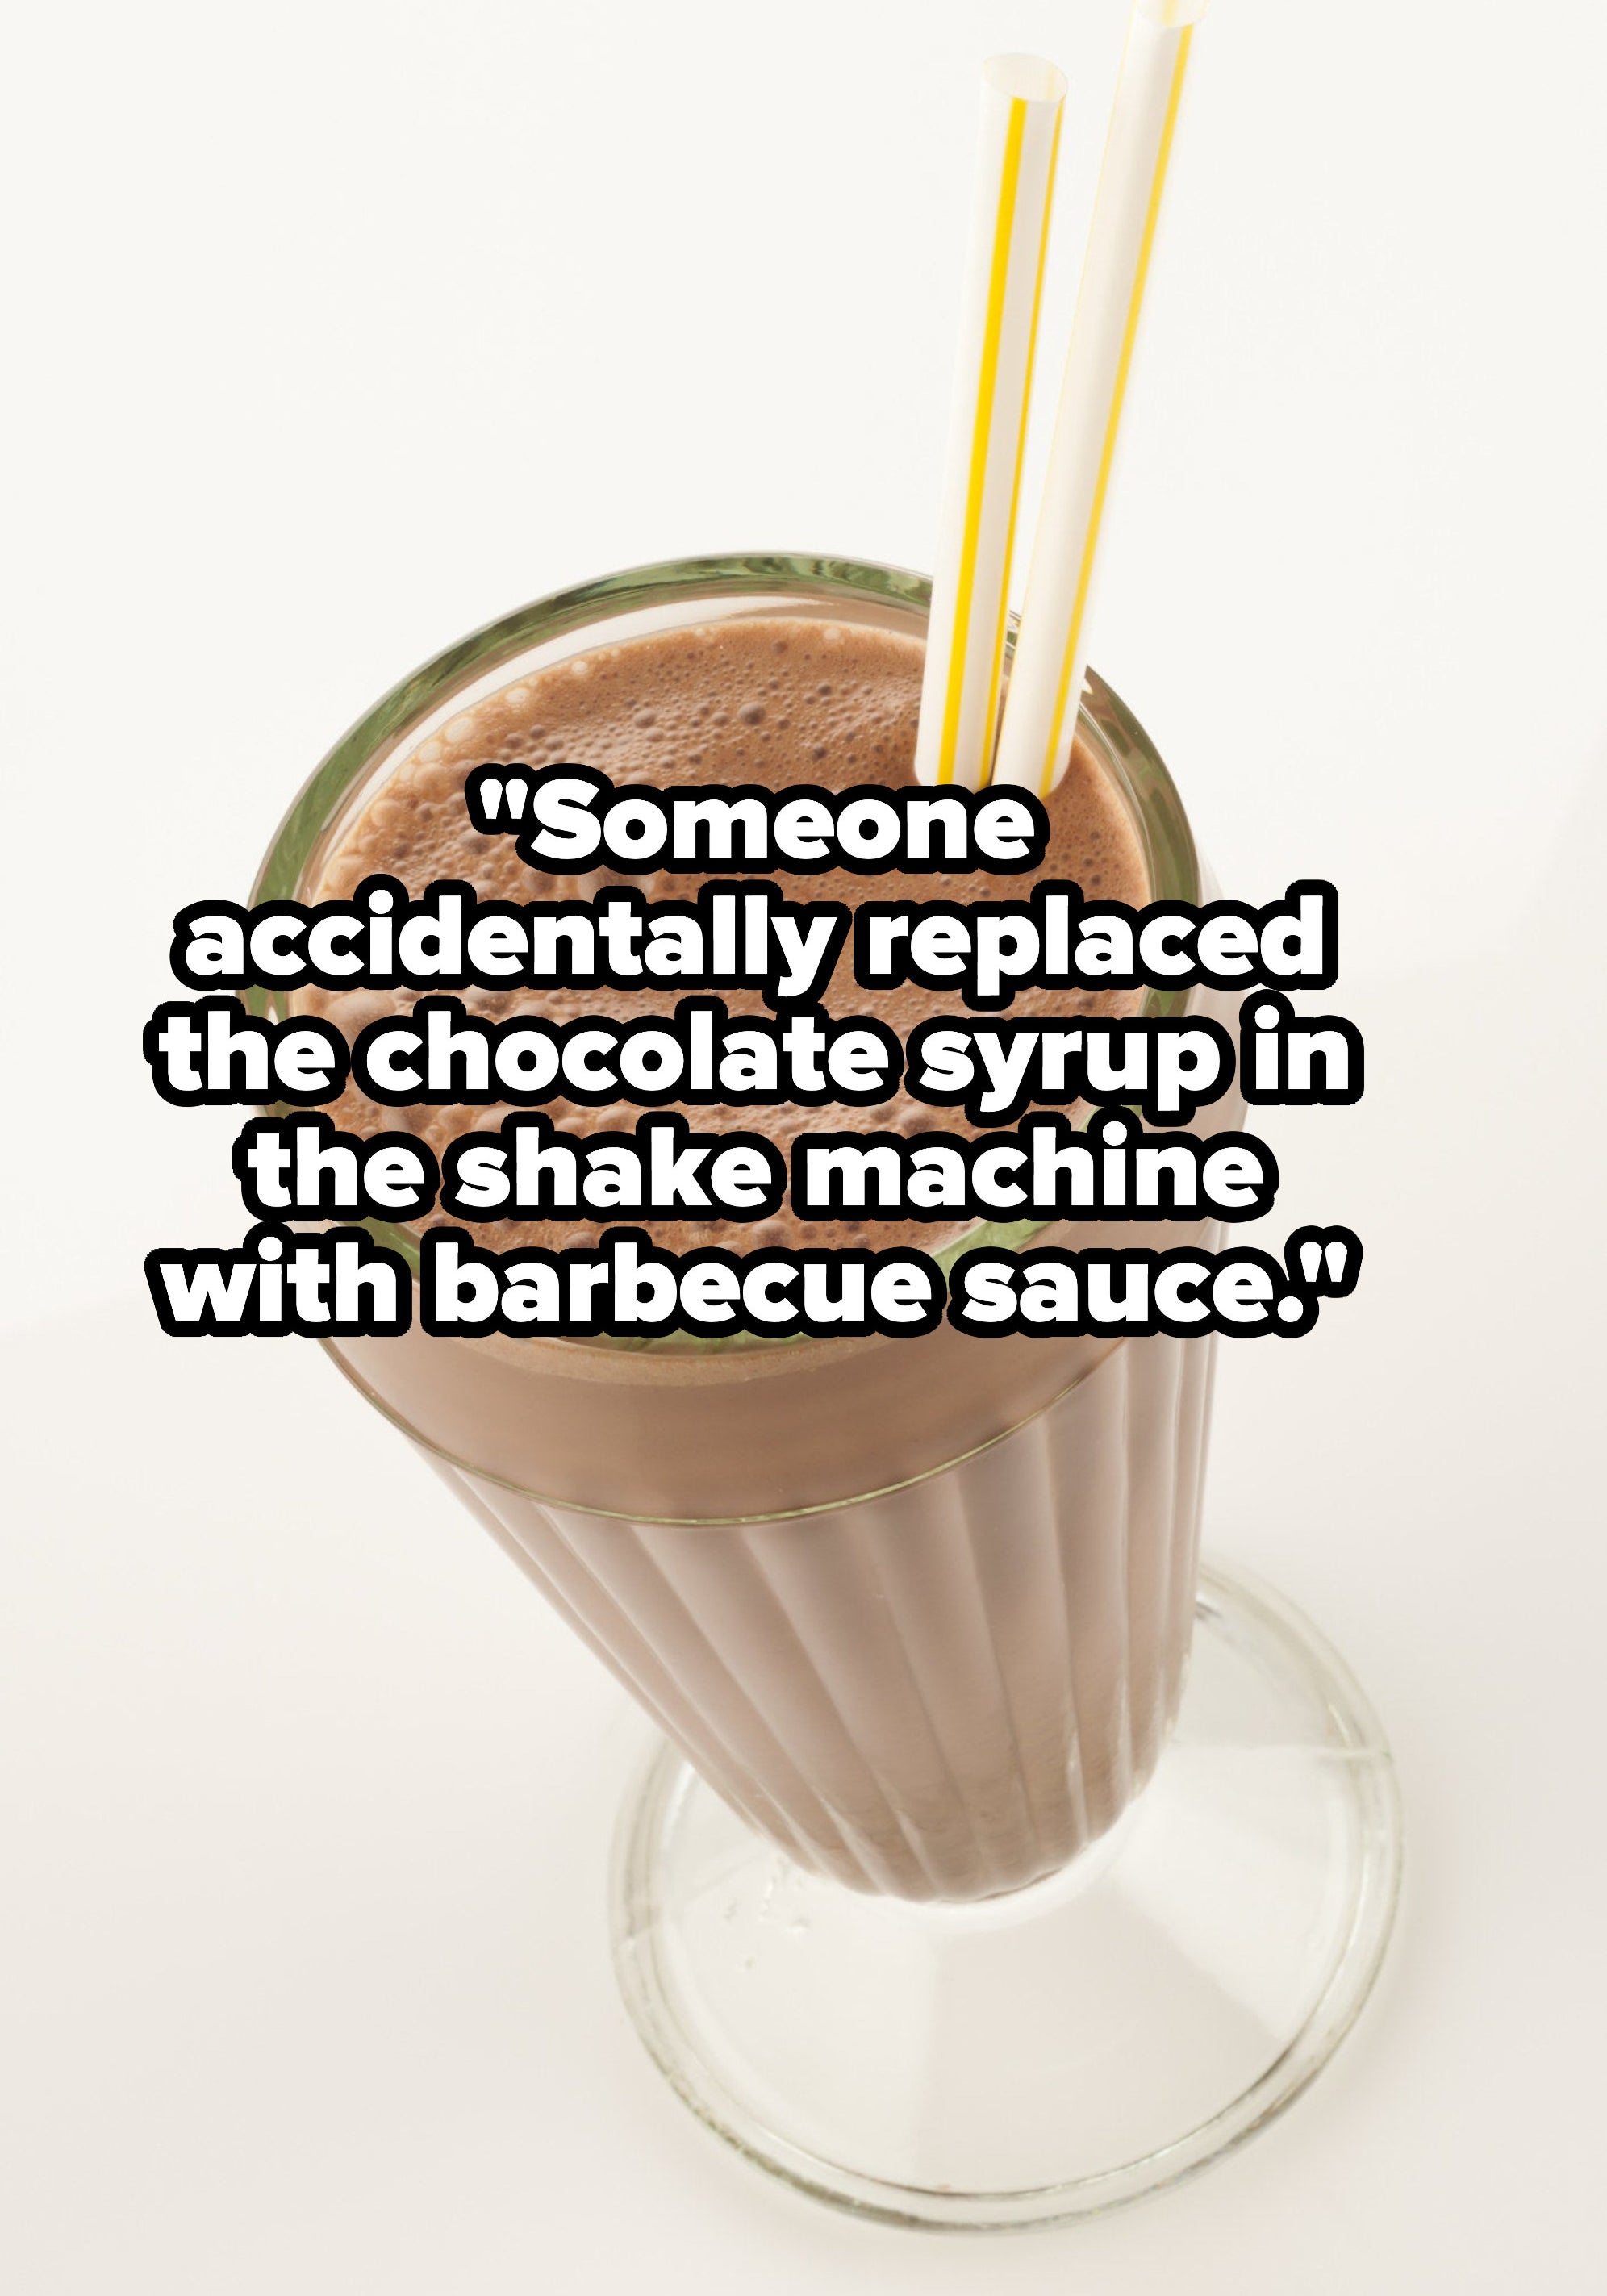 &quot;someone accidentally replaced the chocolate syrup in the shake machine with barbecue sauce&quot; over a chocolate shake